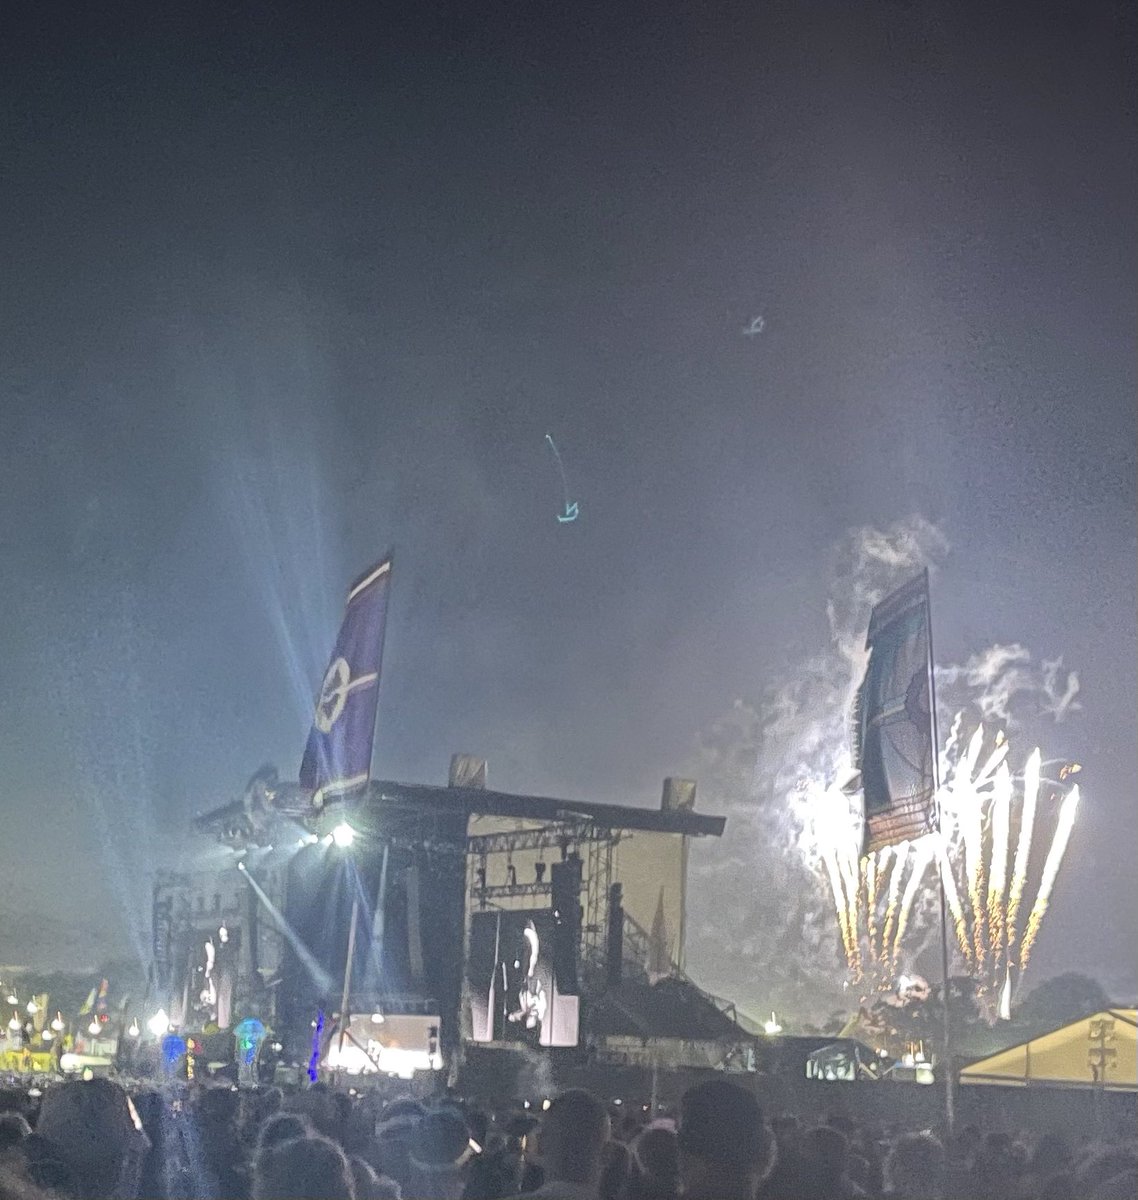 And so concludes #glastonburyfestival2022. Thought the Pet Shop Boys were ace. All the hits, big-time show. A fitting end. Will be some notes and takeaways at some point but at this point, I’m fucking knackered!